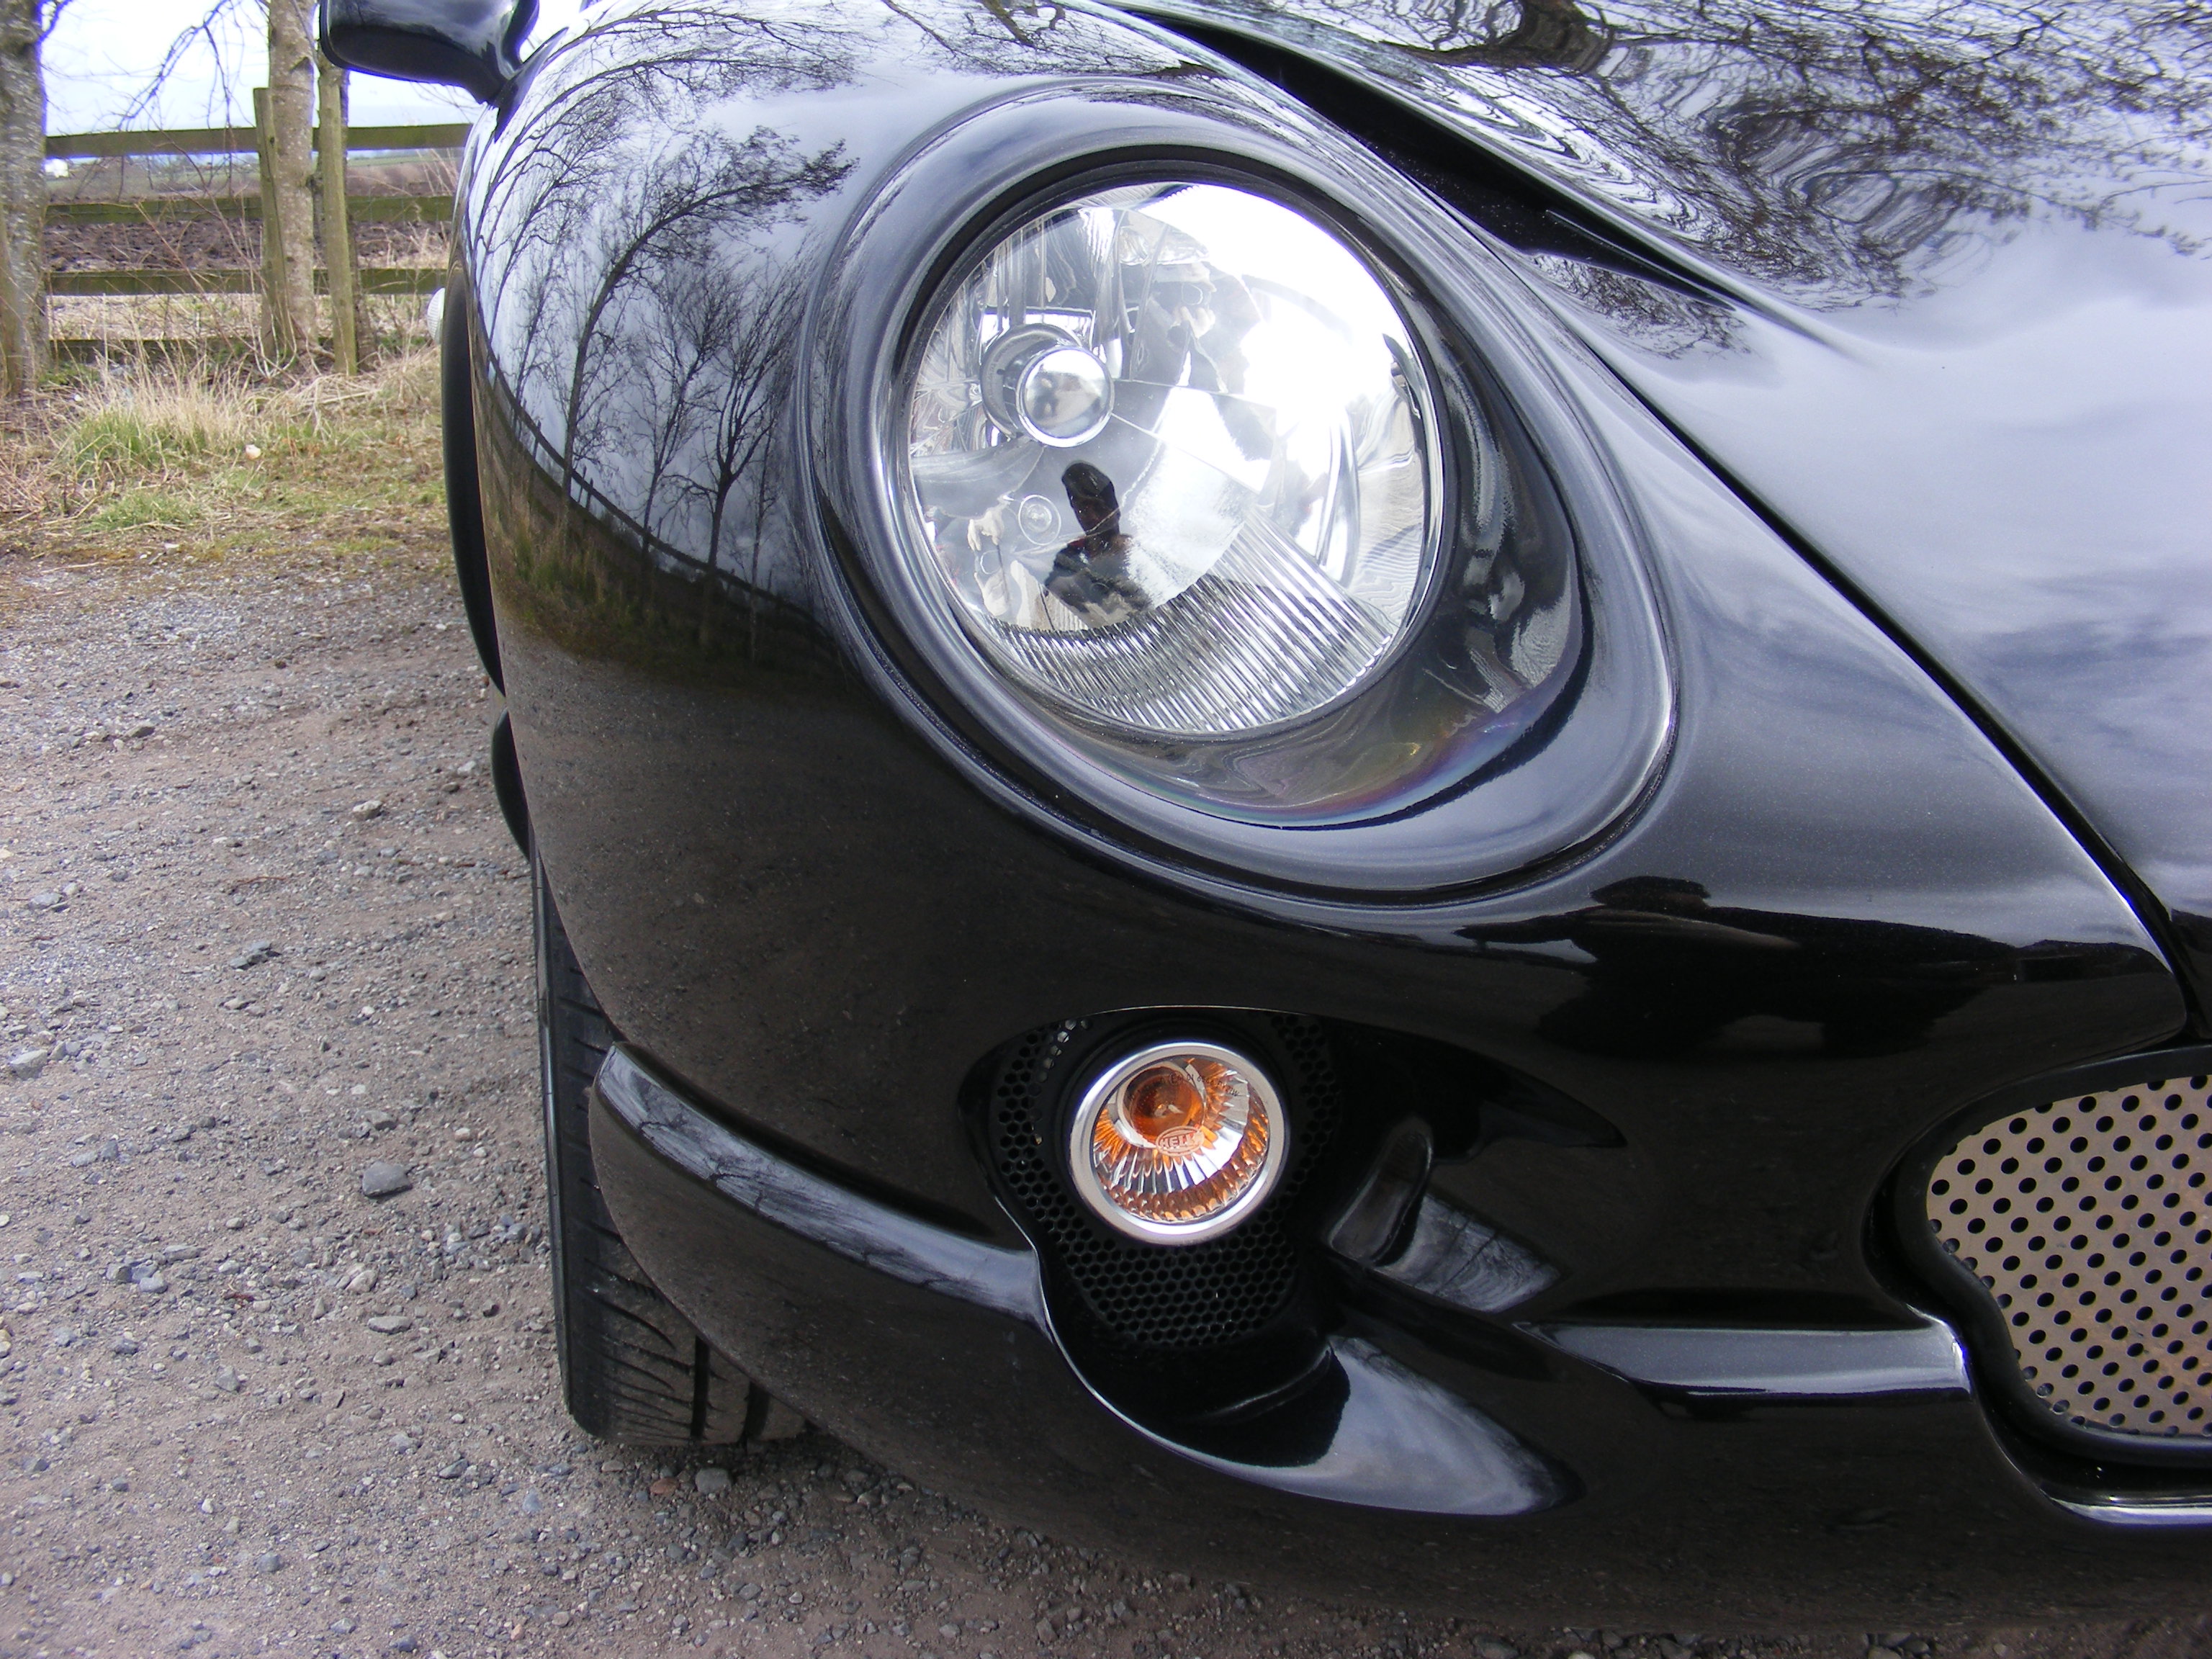 Lupo lights before and after pics please - Page 1 - Chimaera - PistonHeads